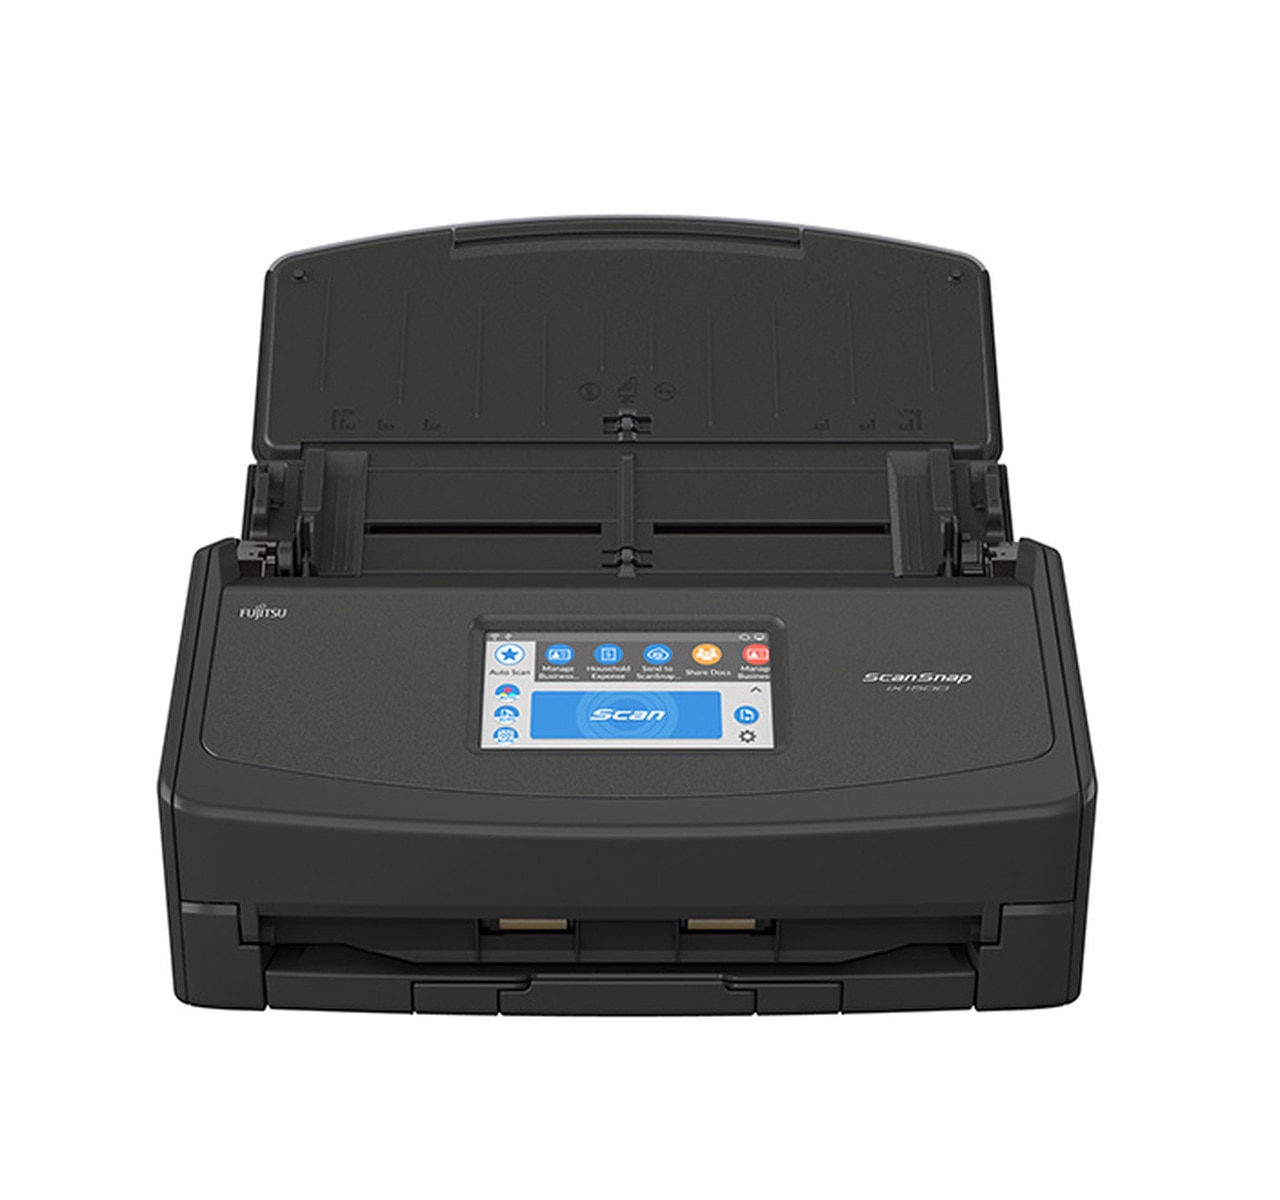 fujitsu scansnap s1500 driver download for windows 7